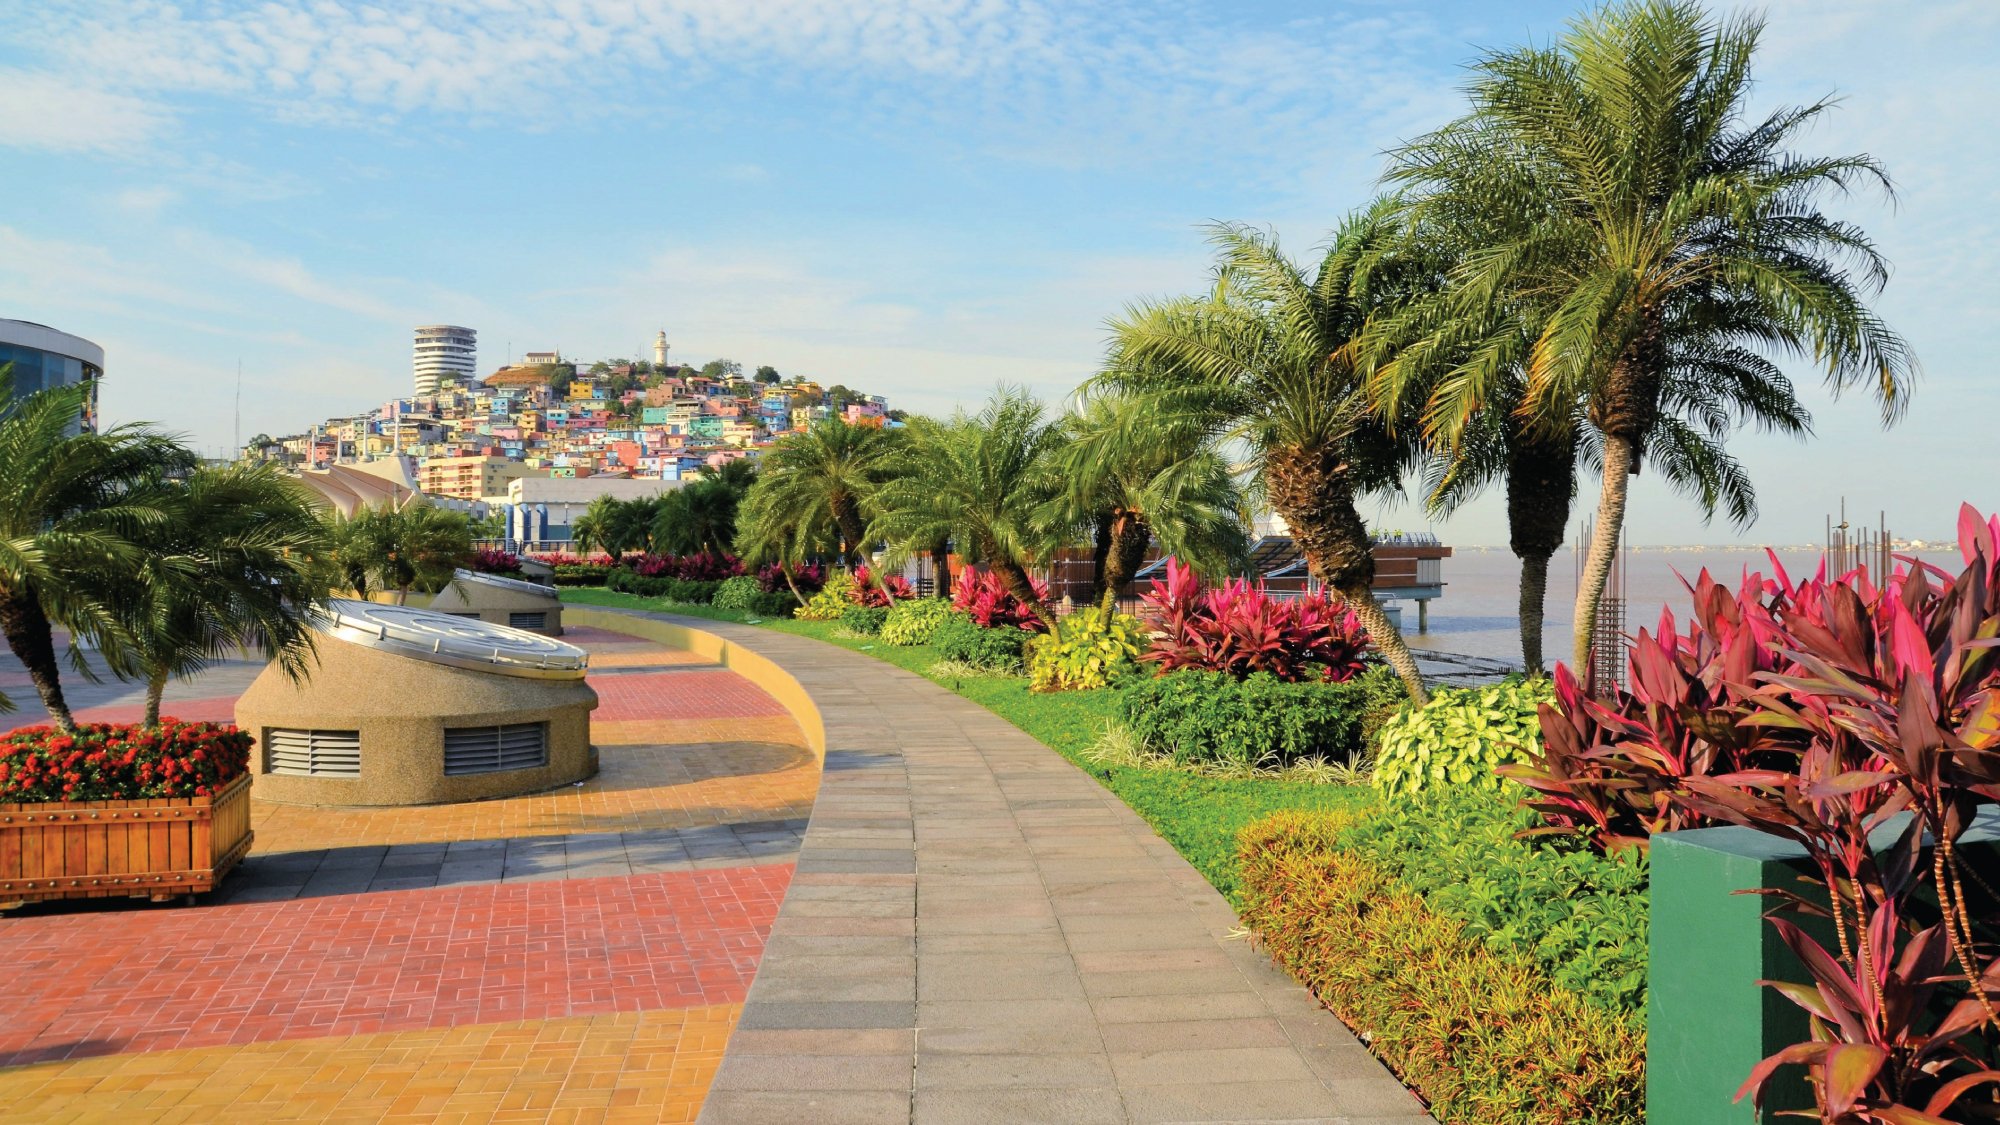 A scenic view of the pier in Guayaquil, Ecuador, offering a starting point for pilots planning a self-flying journey to the Galapagos Islands